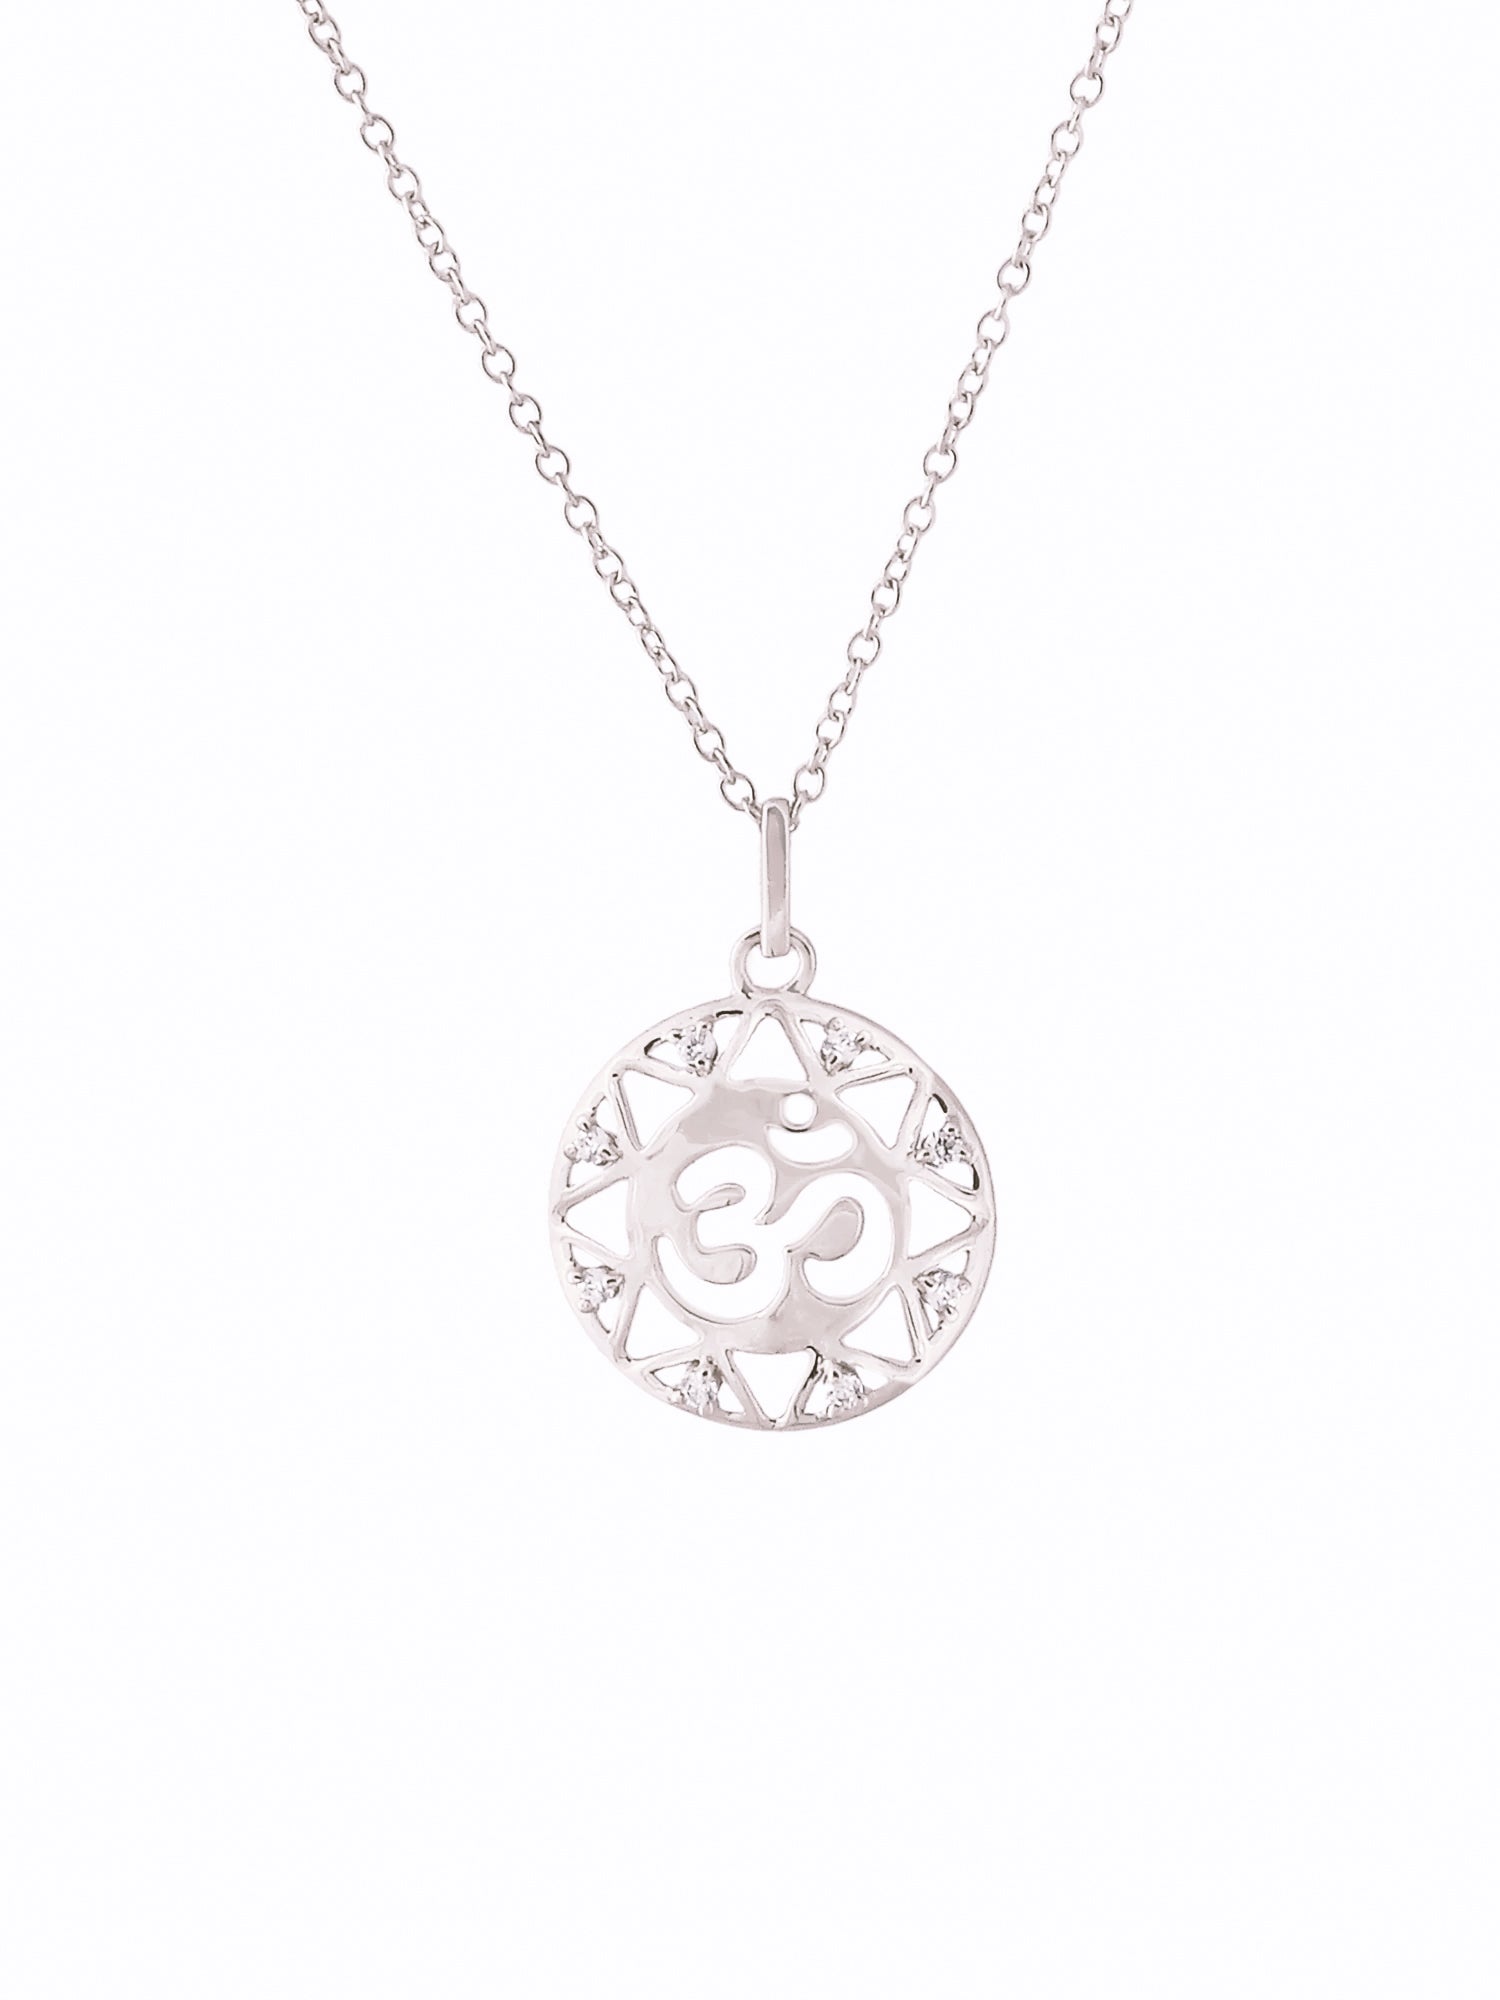 925 SILVER OM NECKLACE